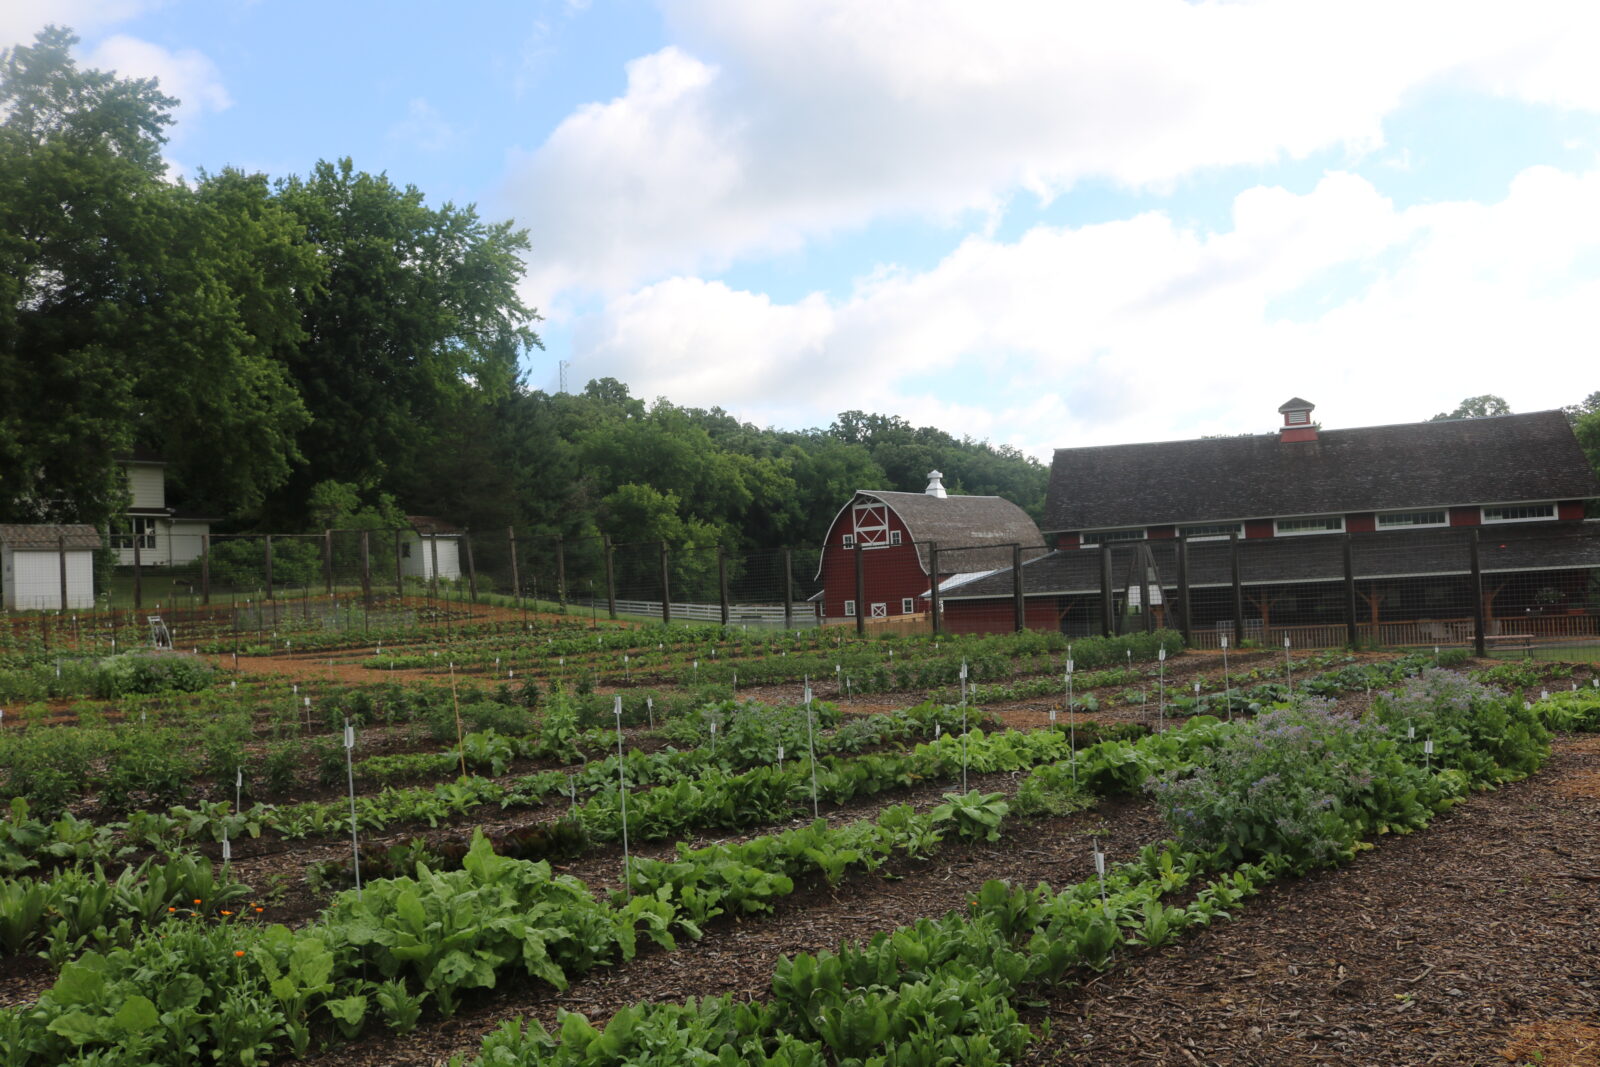 The neat rows of plants in the evaluation garden at Heritage Farm